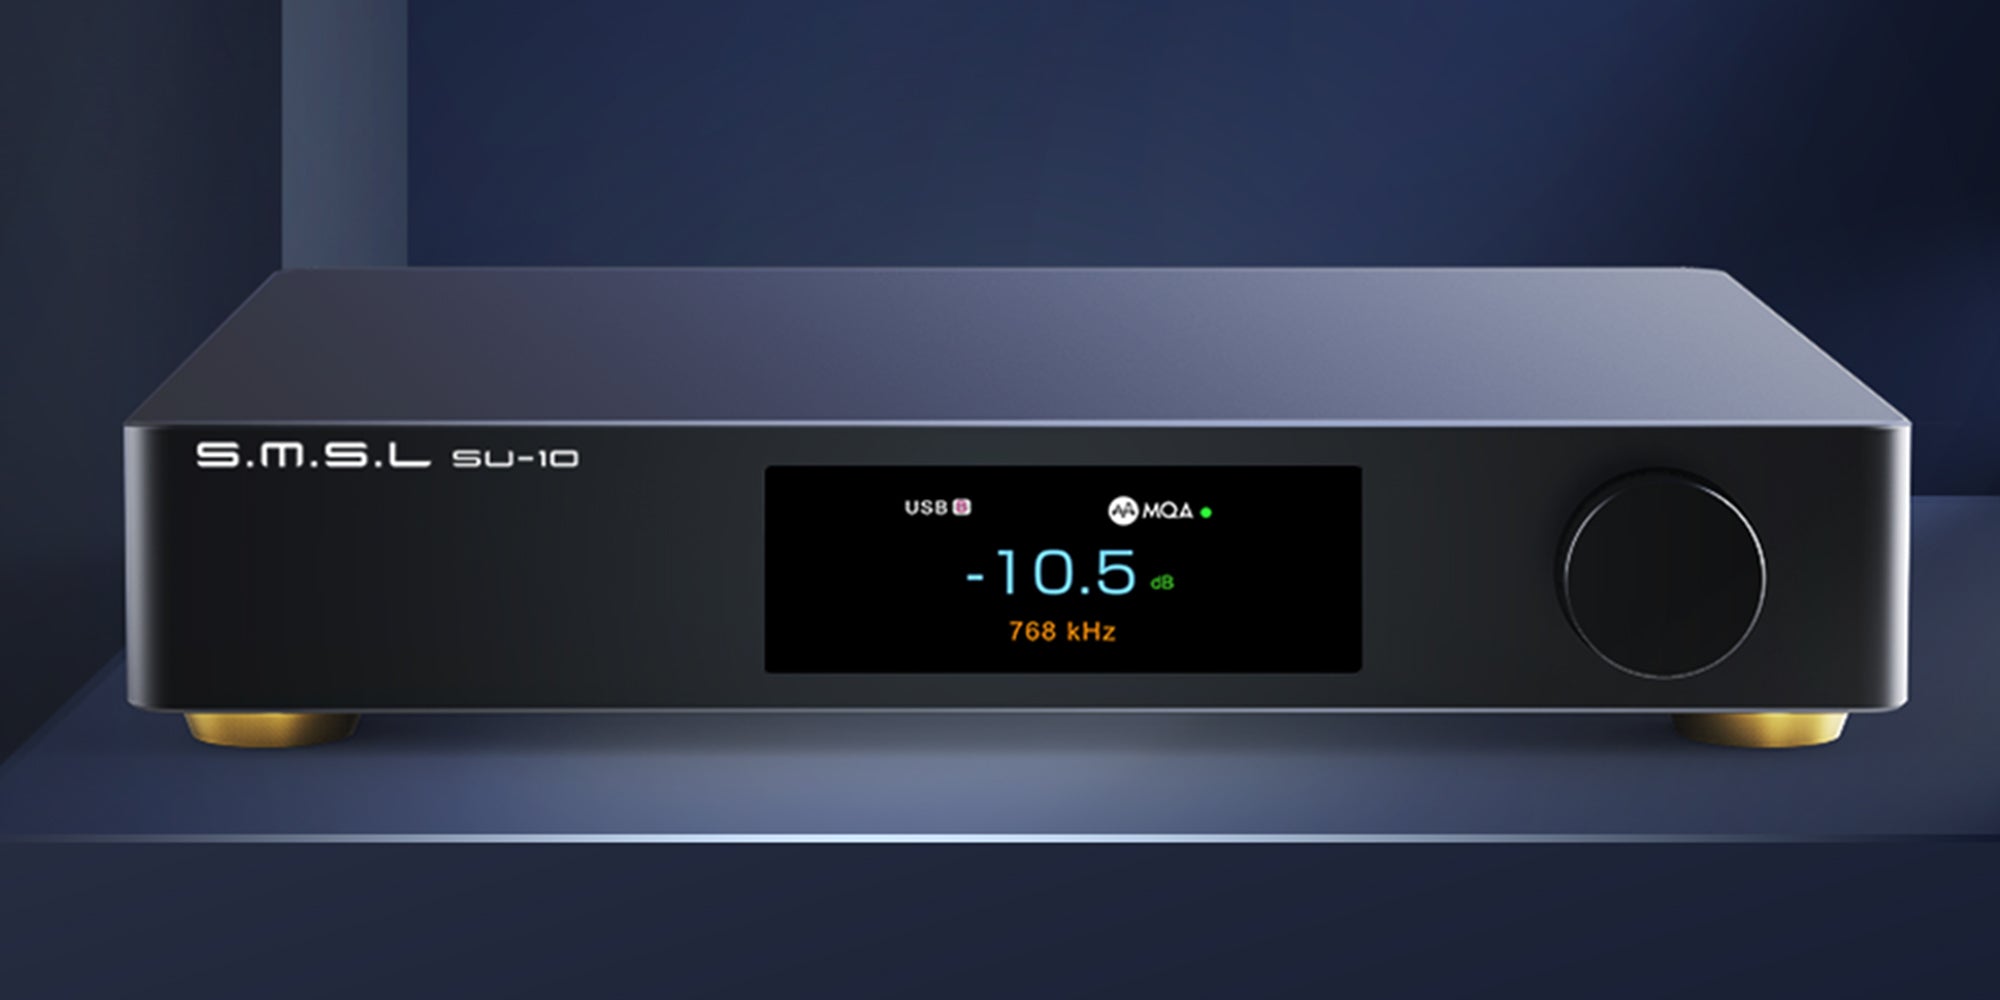 SMSL SU-10 is active now with MQA-CD supported.